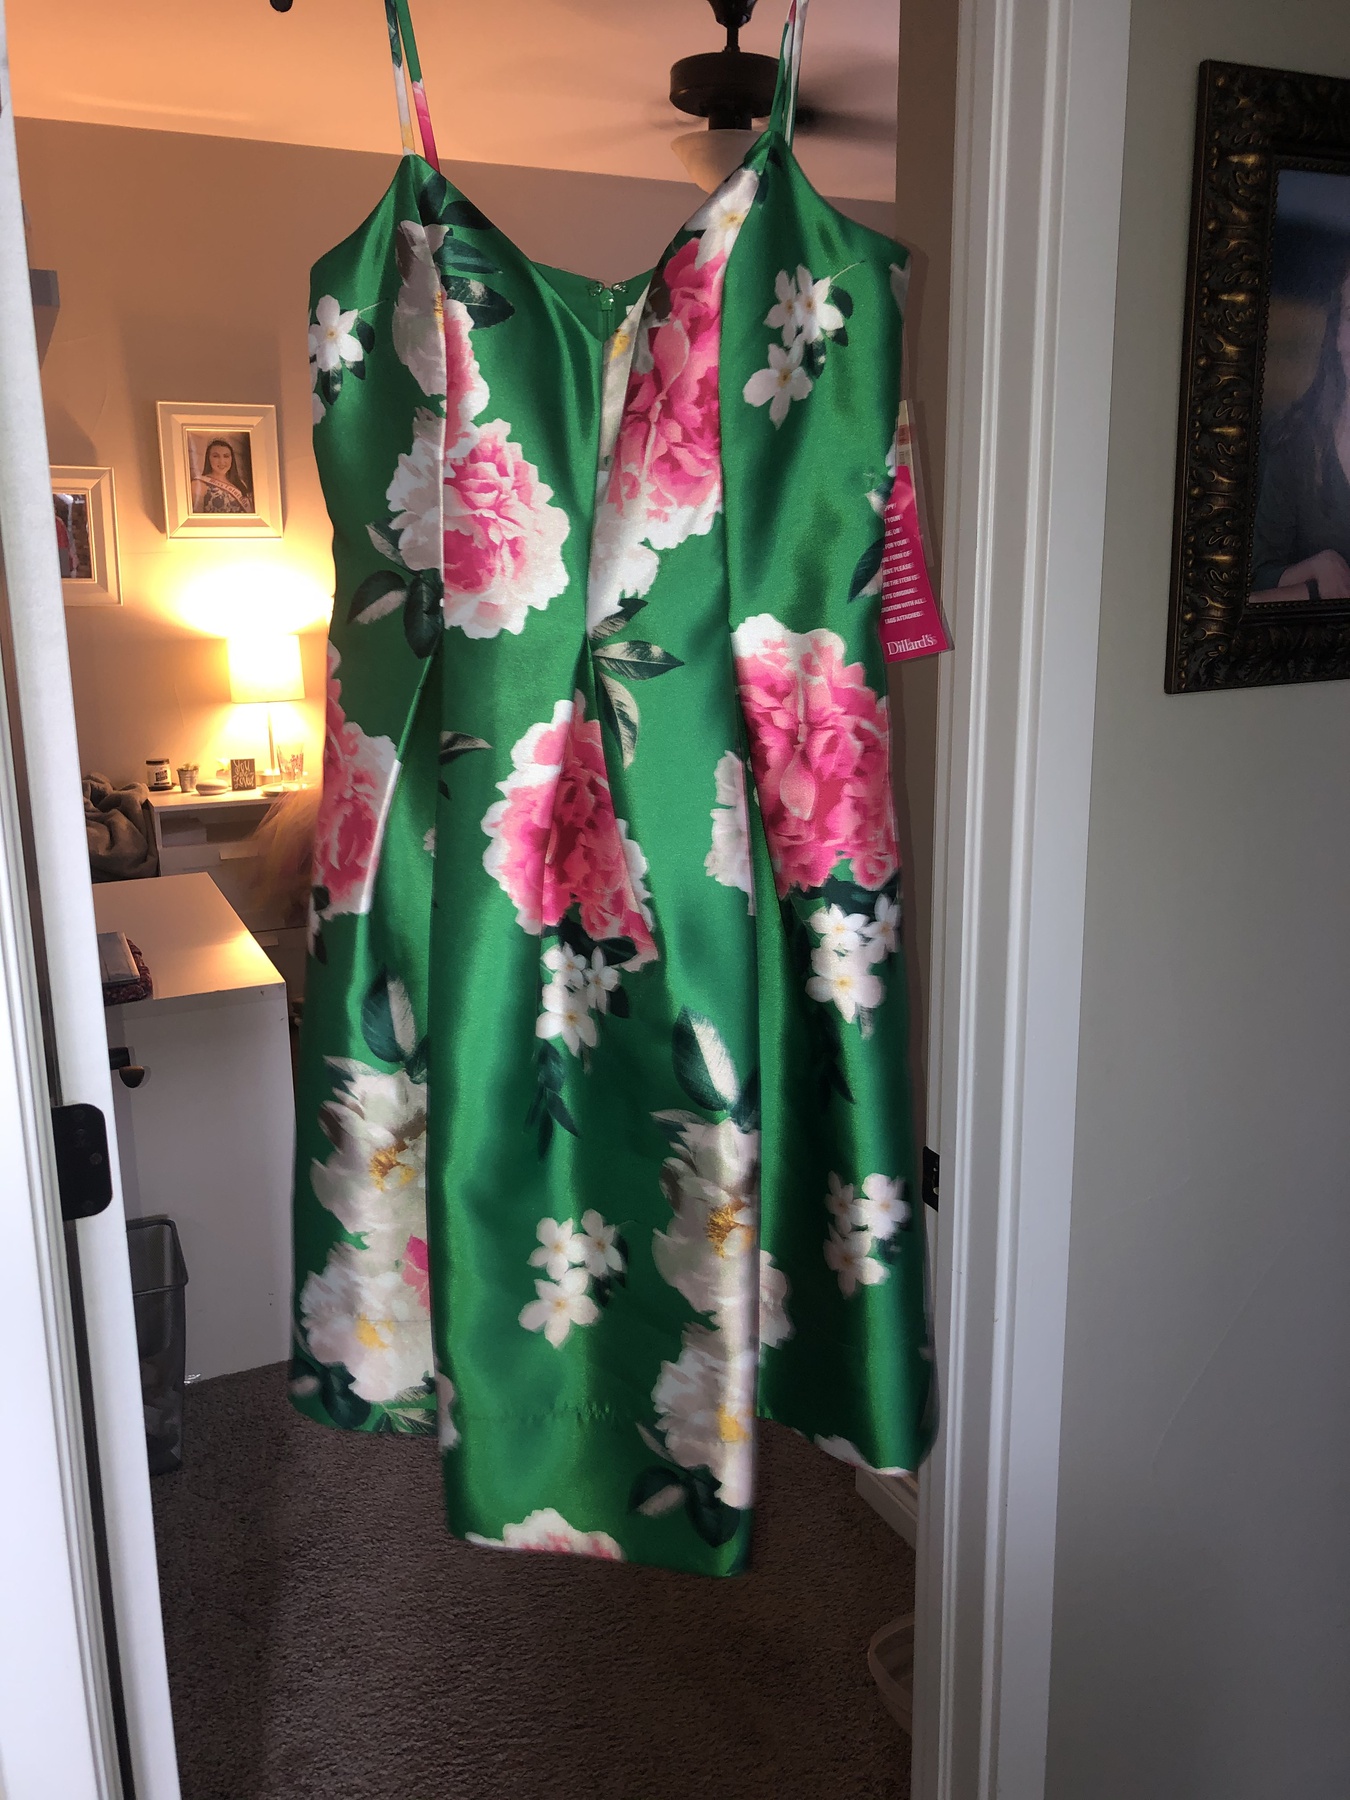 Green Size 14 A-line Dress on Queenly